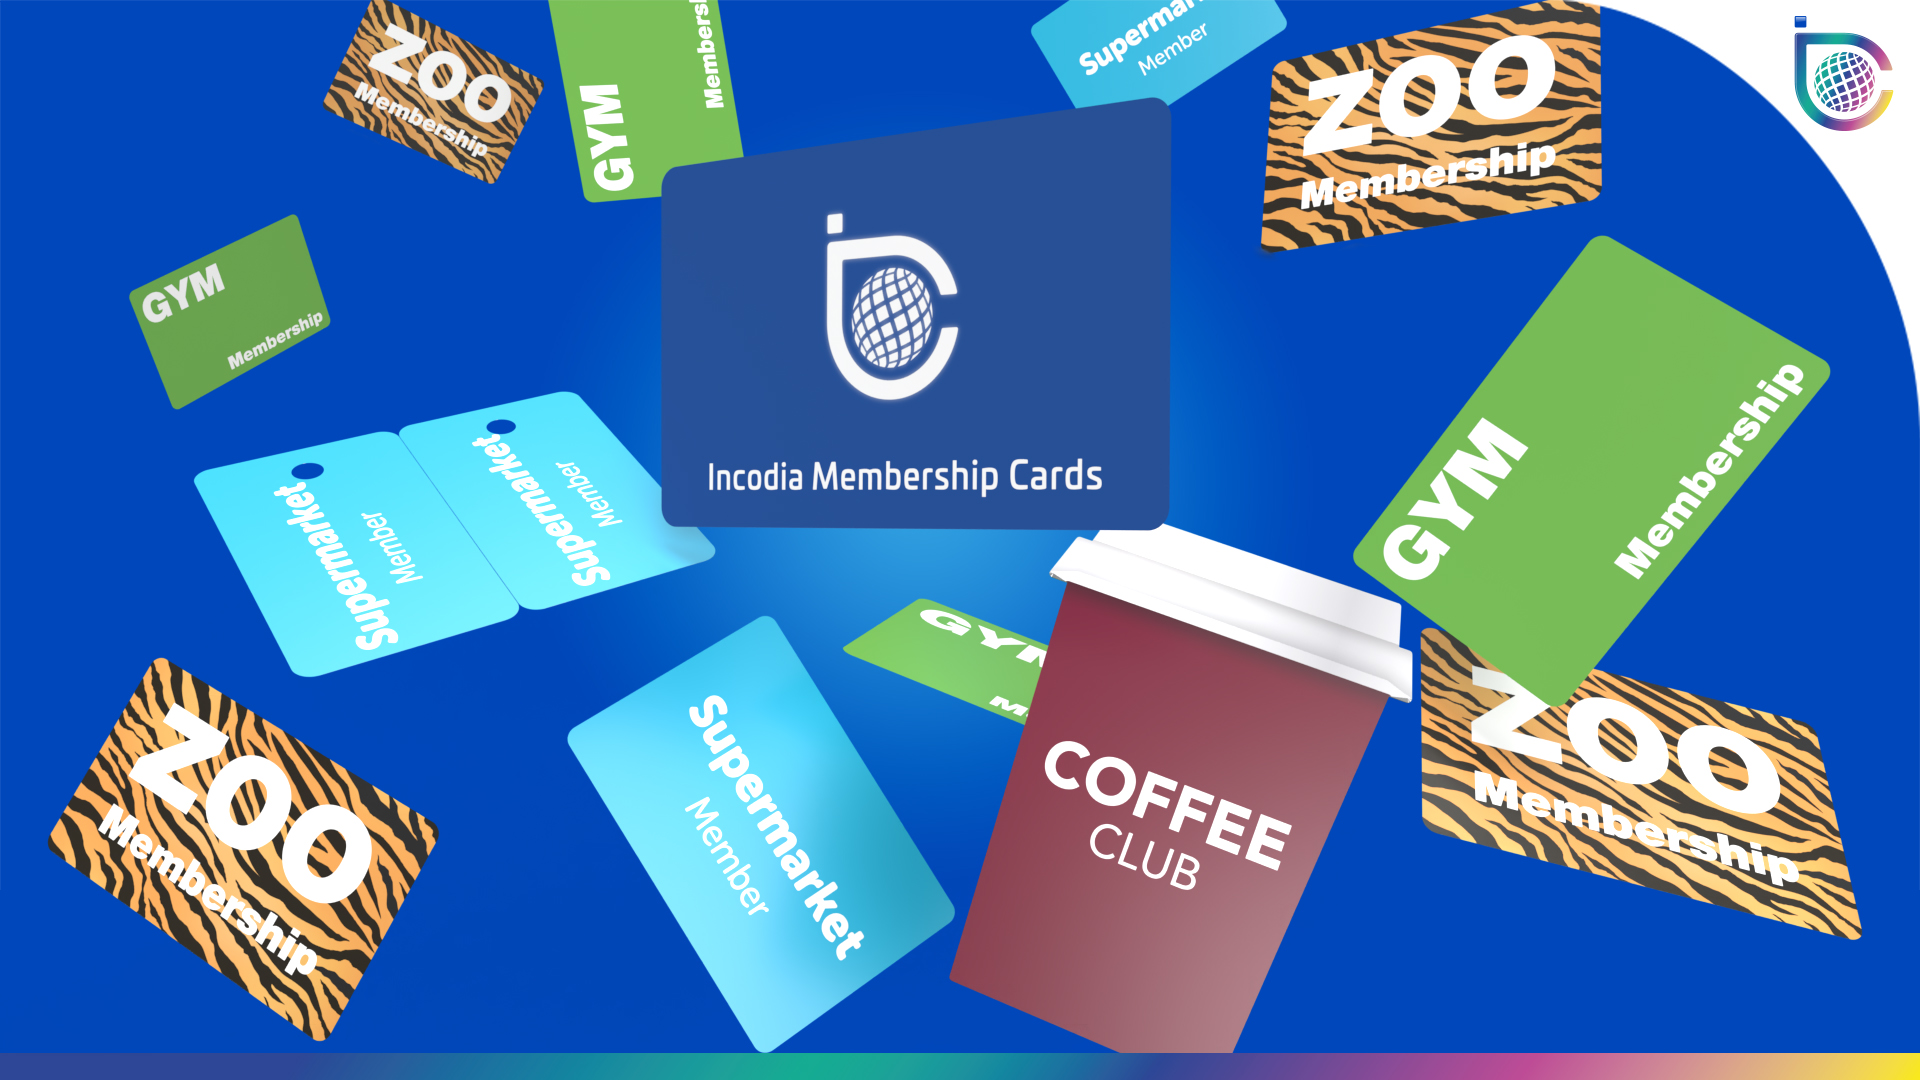 Develop your membership or loyalty card scheme with Incodia